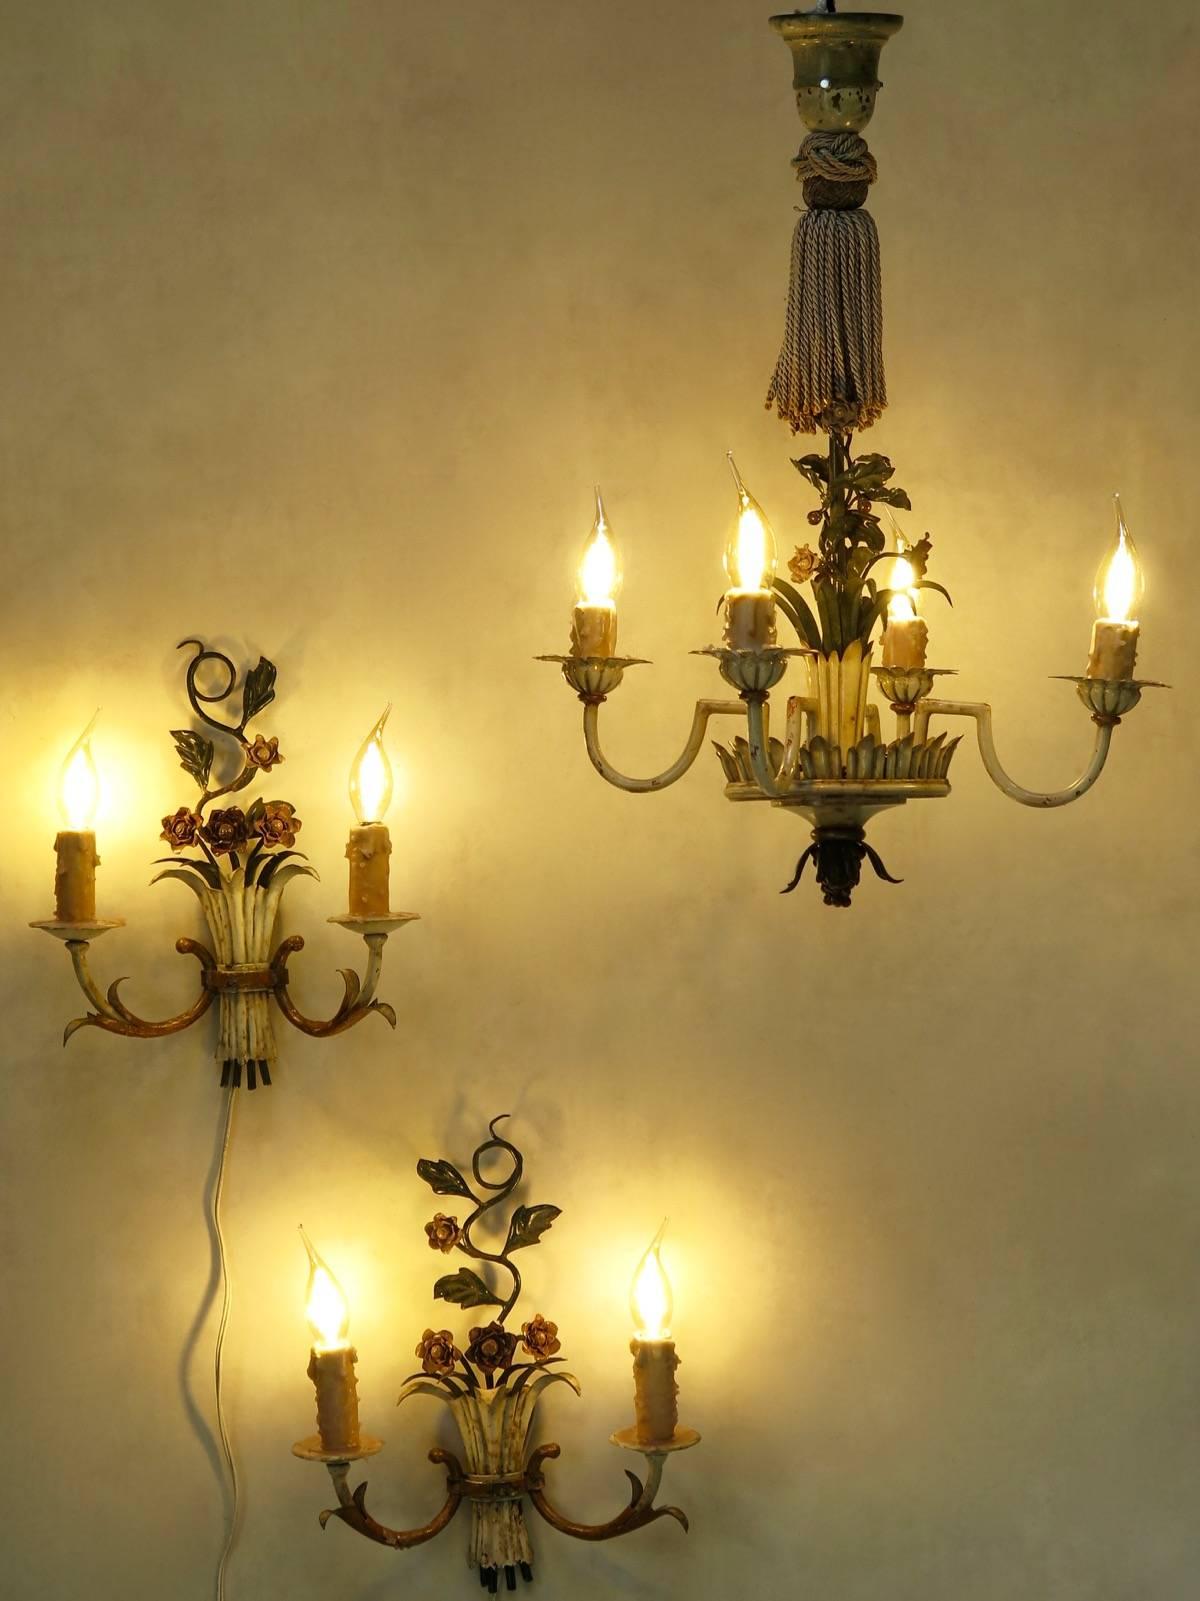 Charming set comprised of a chandelier and two sconces. The structure is of painted iron, with a delicate floral decor, and pointy leaves. The chandelier has a large twisted silk tassel at the top, and four lights.

Dimensions provided below are